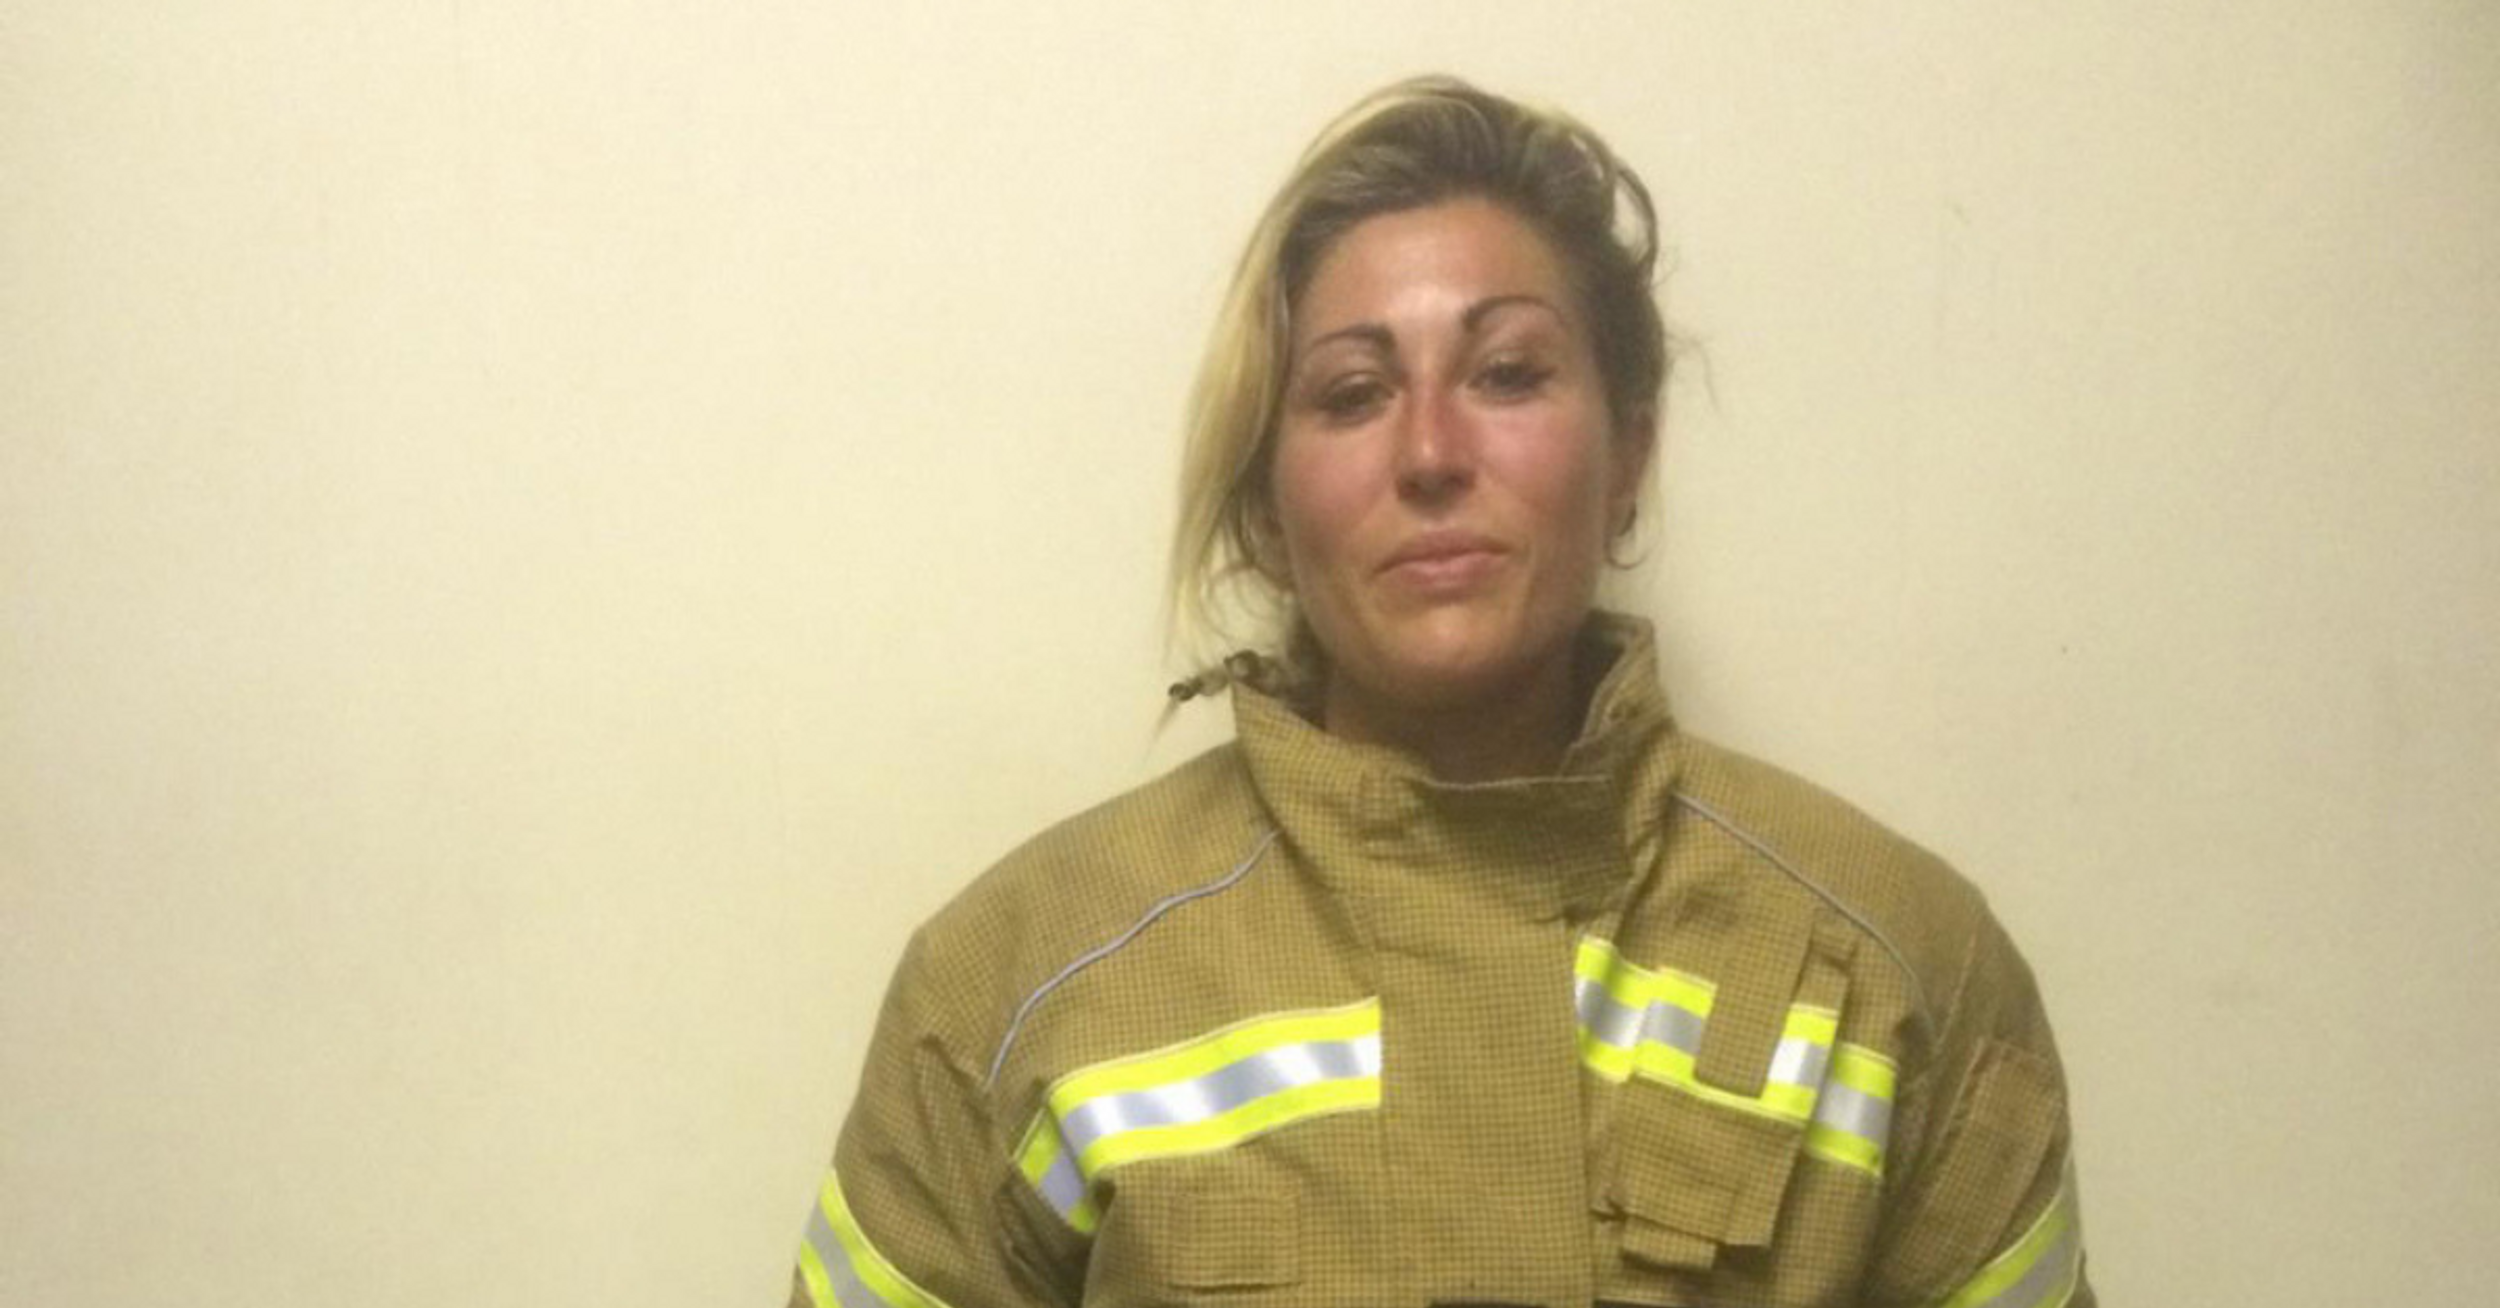 Woman Mortified By A Vacation Picture Becomes Firefighter After Losing Nearly 170 Pounds